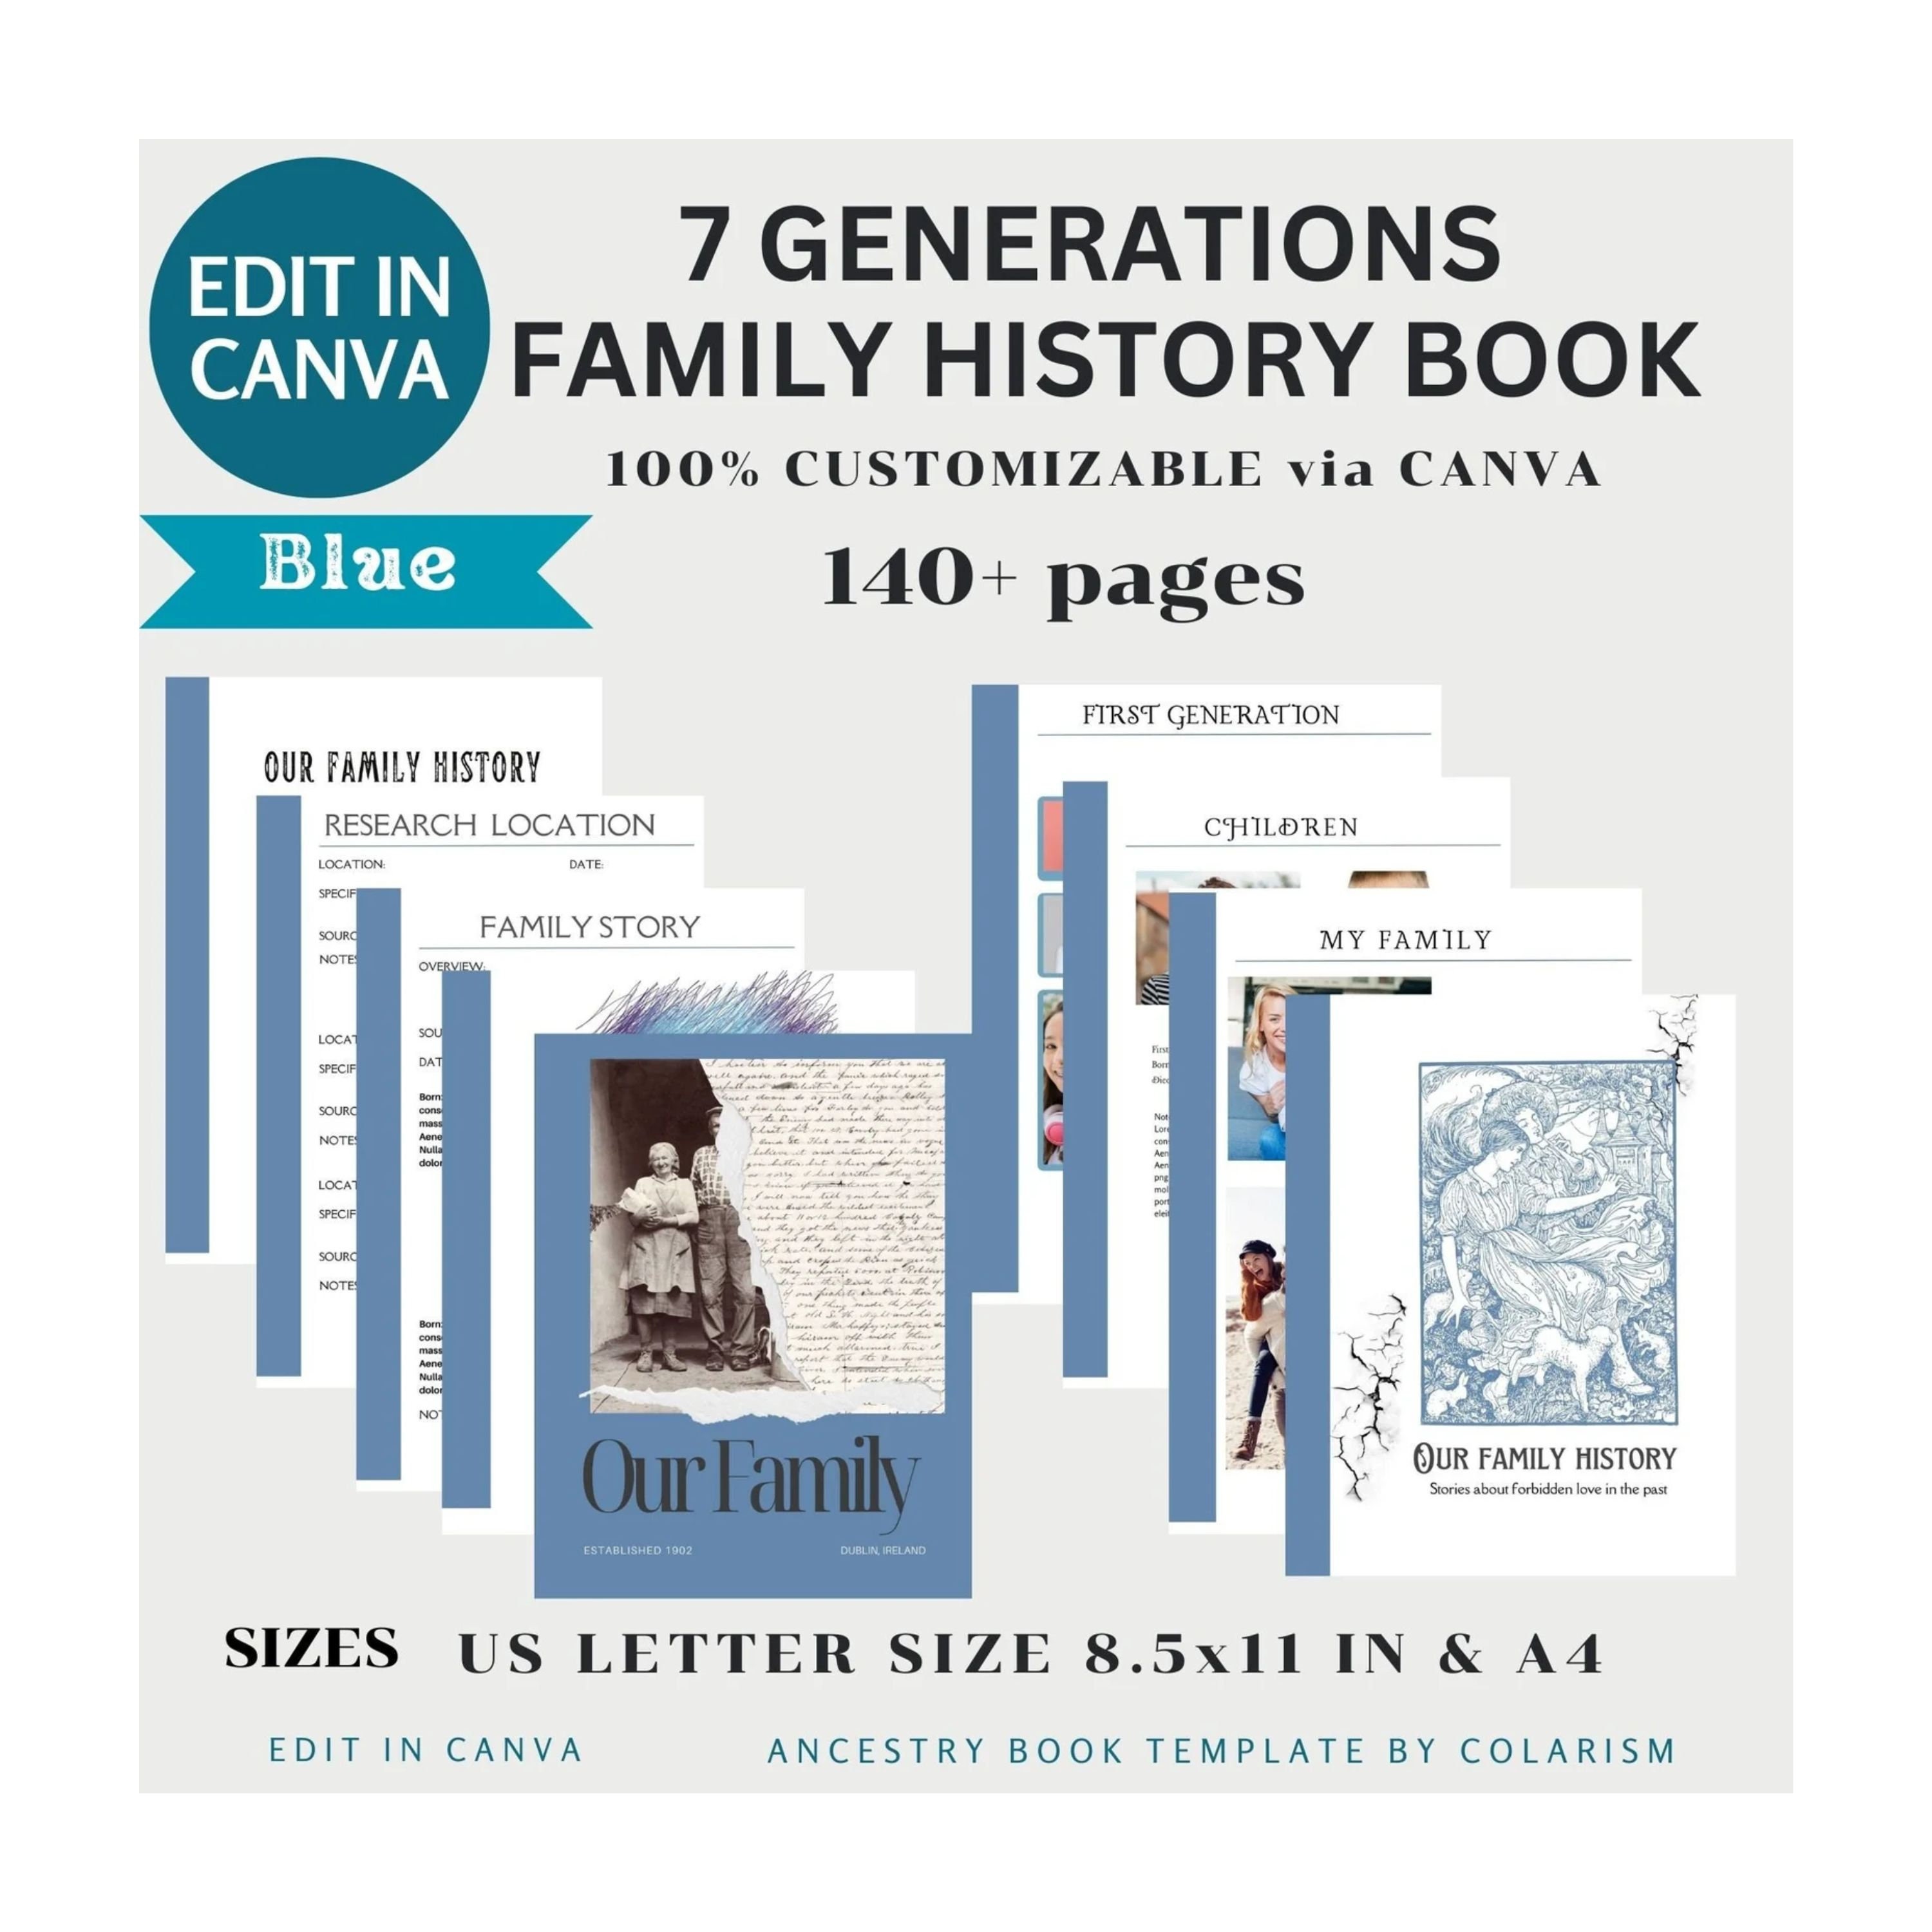 My Family Tree Notebook: Genealogy Journal Book To Write Notes In About  Your Family History: White Background With Tree and Bench